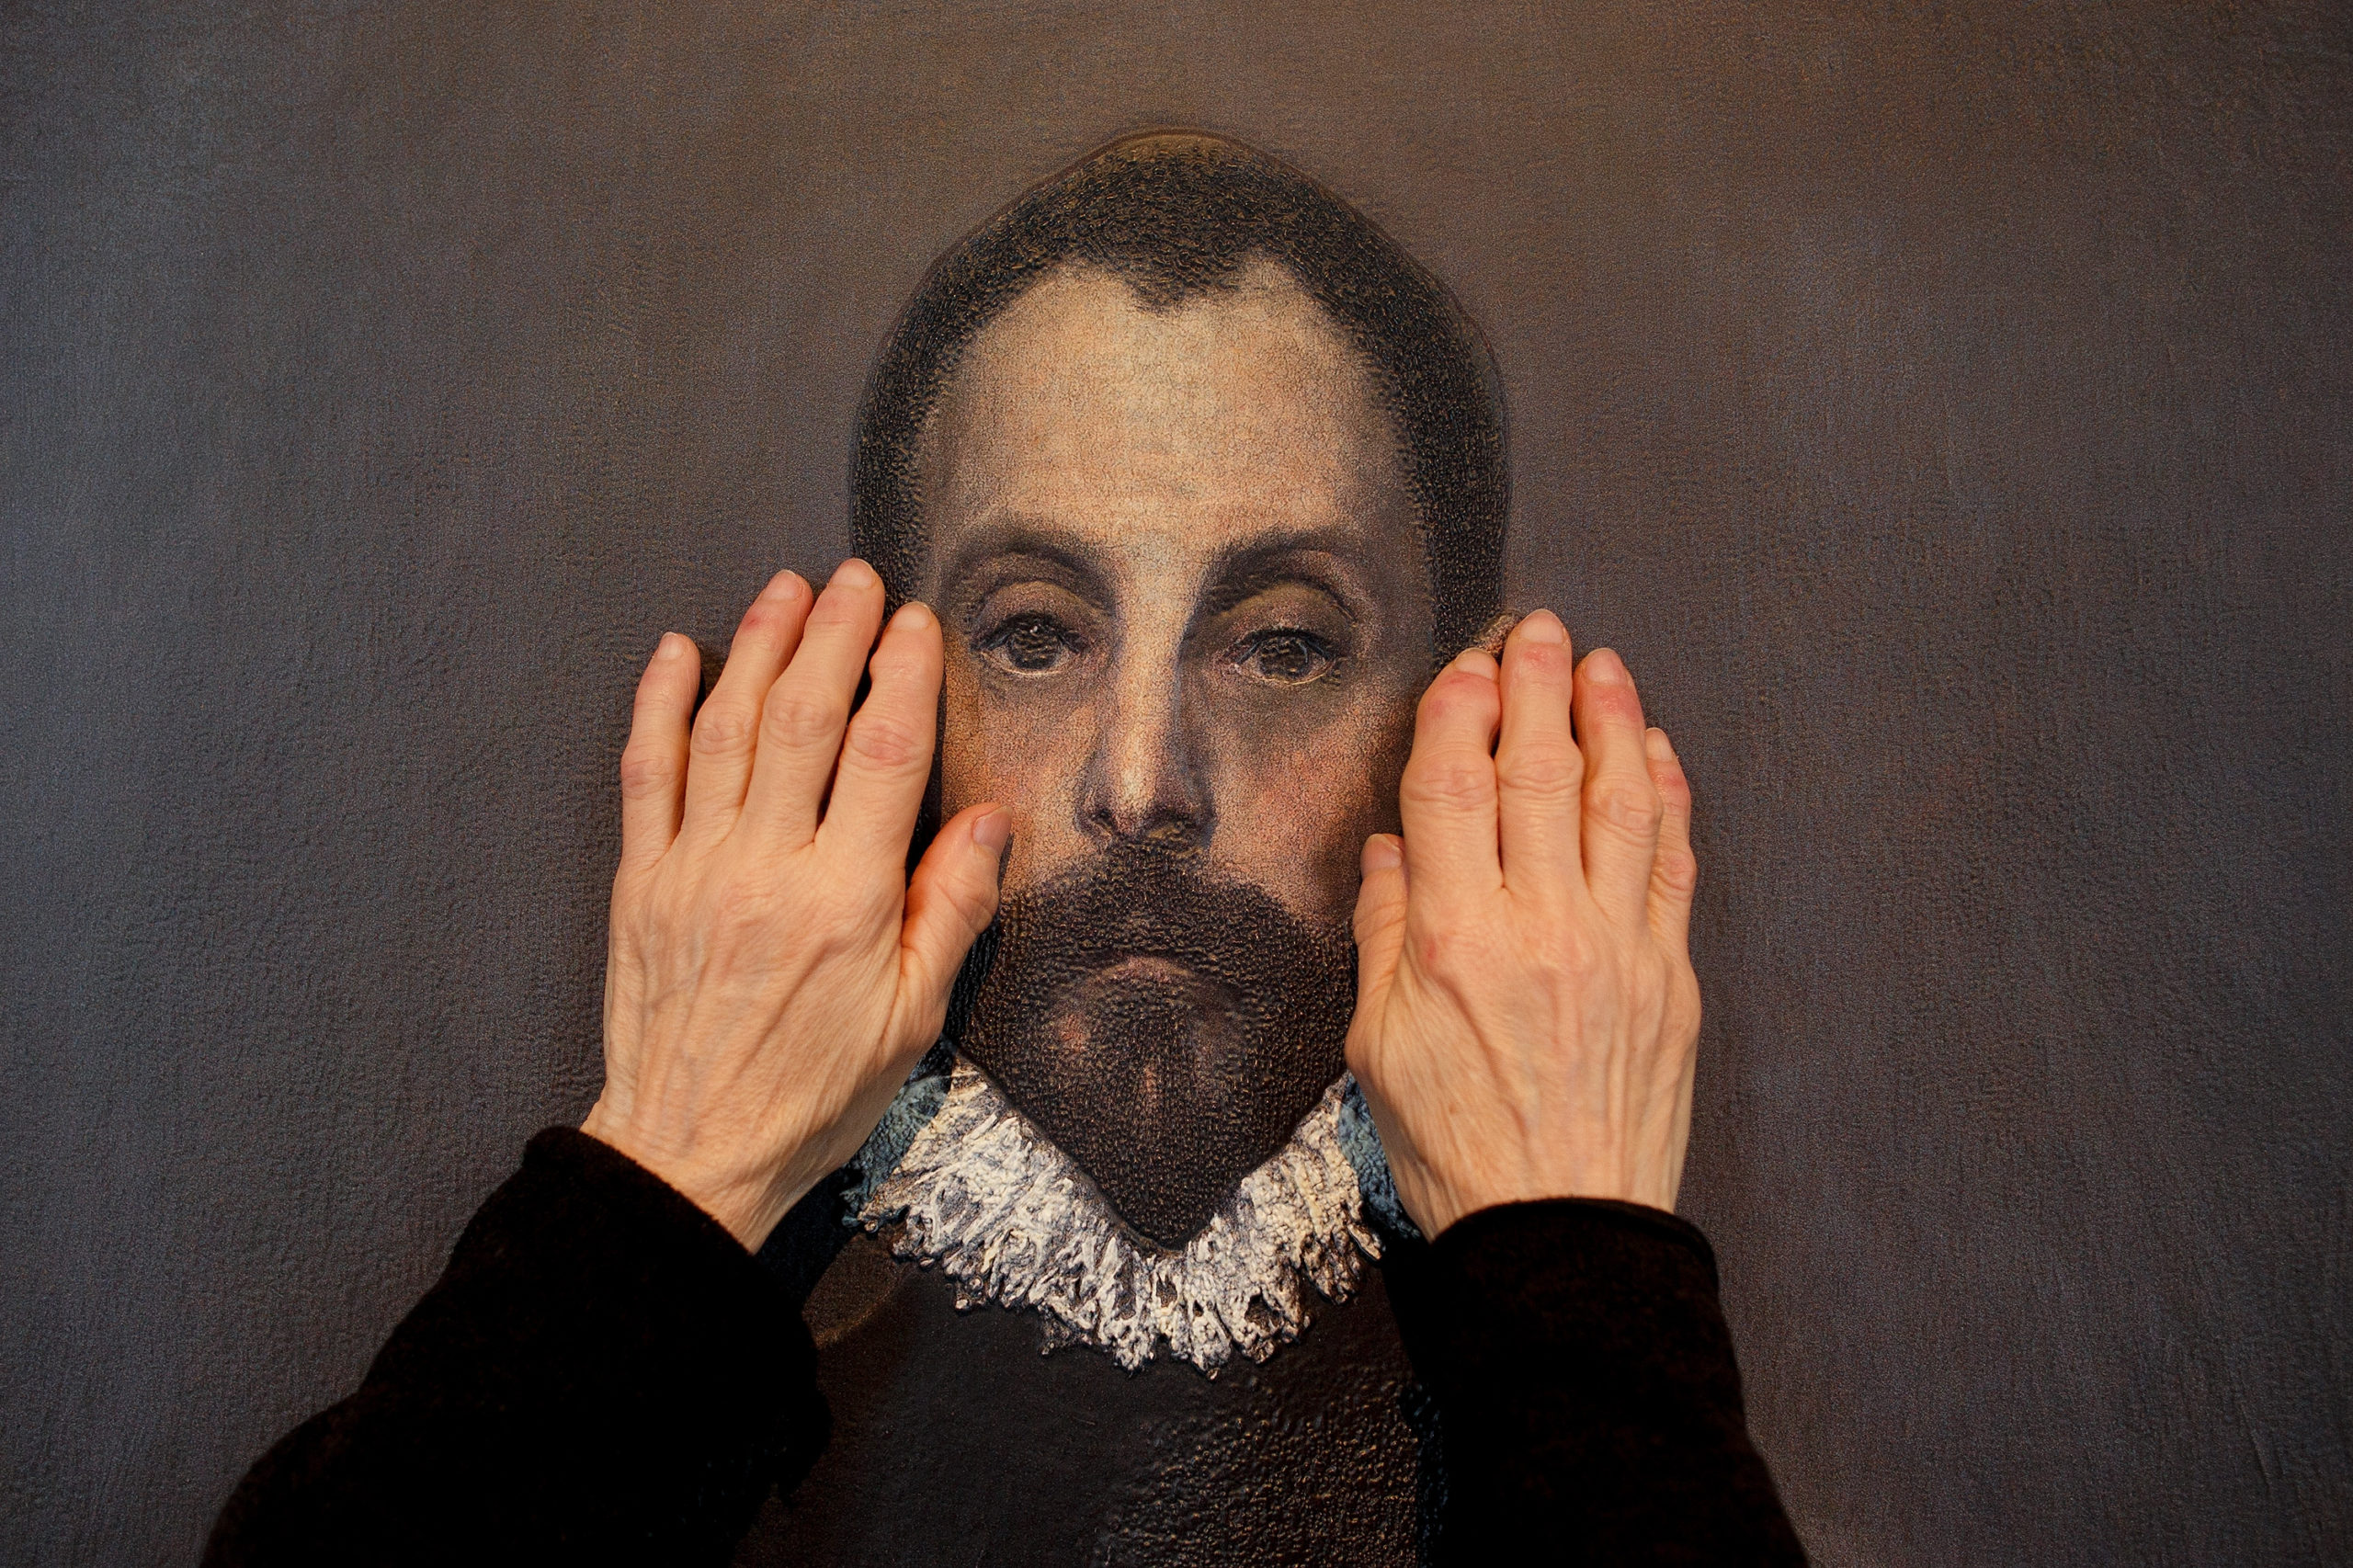 New Printing Tech Allows The Blind To Touch Priceless Paintings